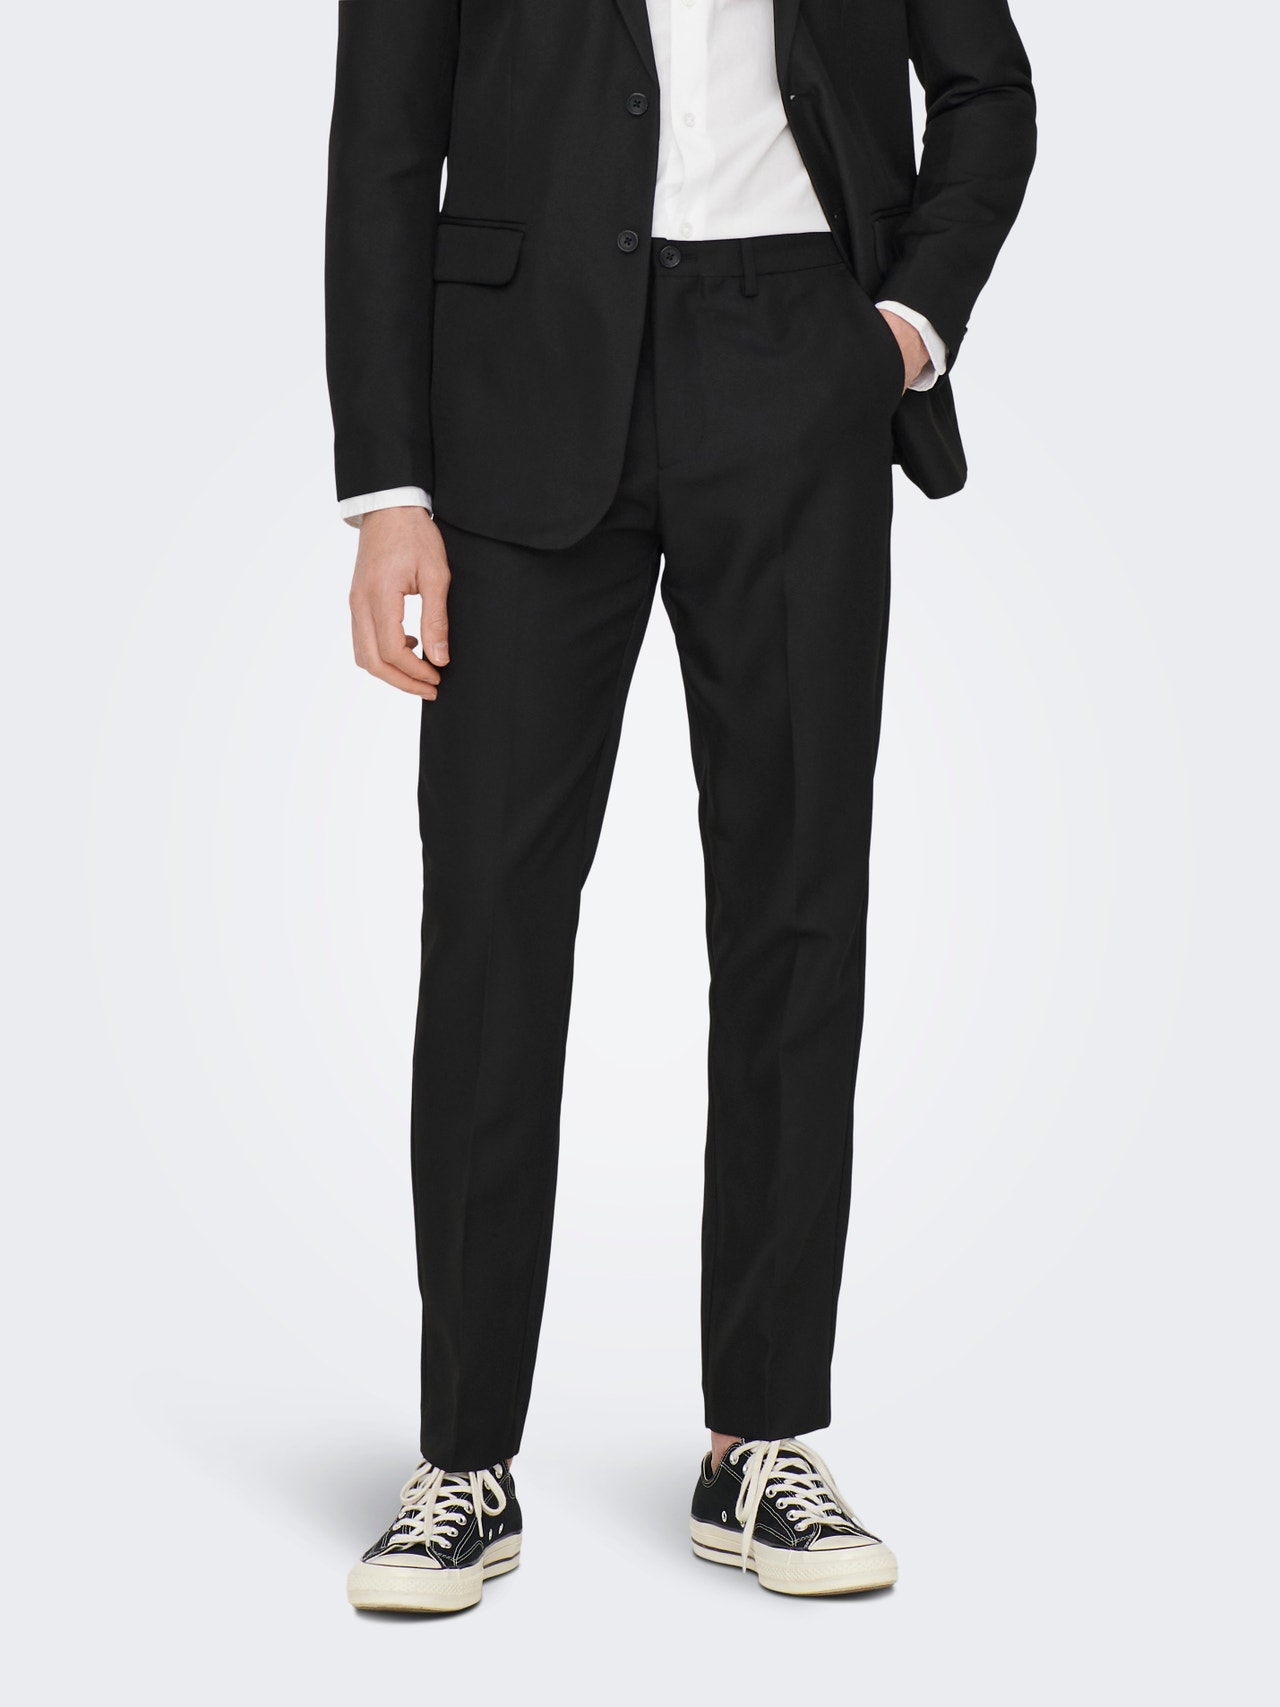 ONLY & SONS Classic trousers -Black - 22026243